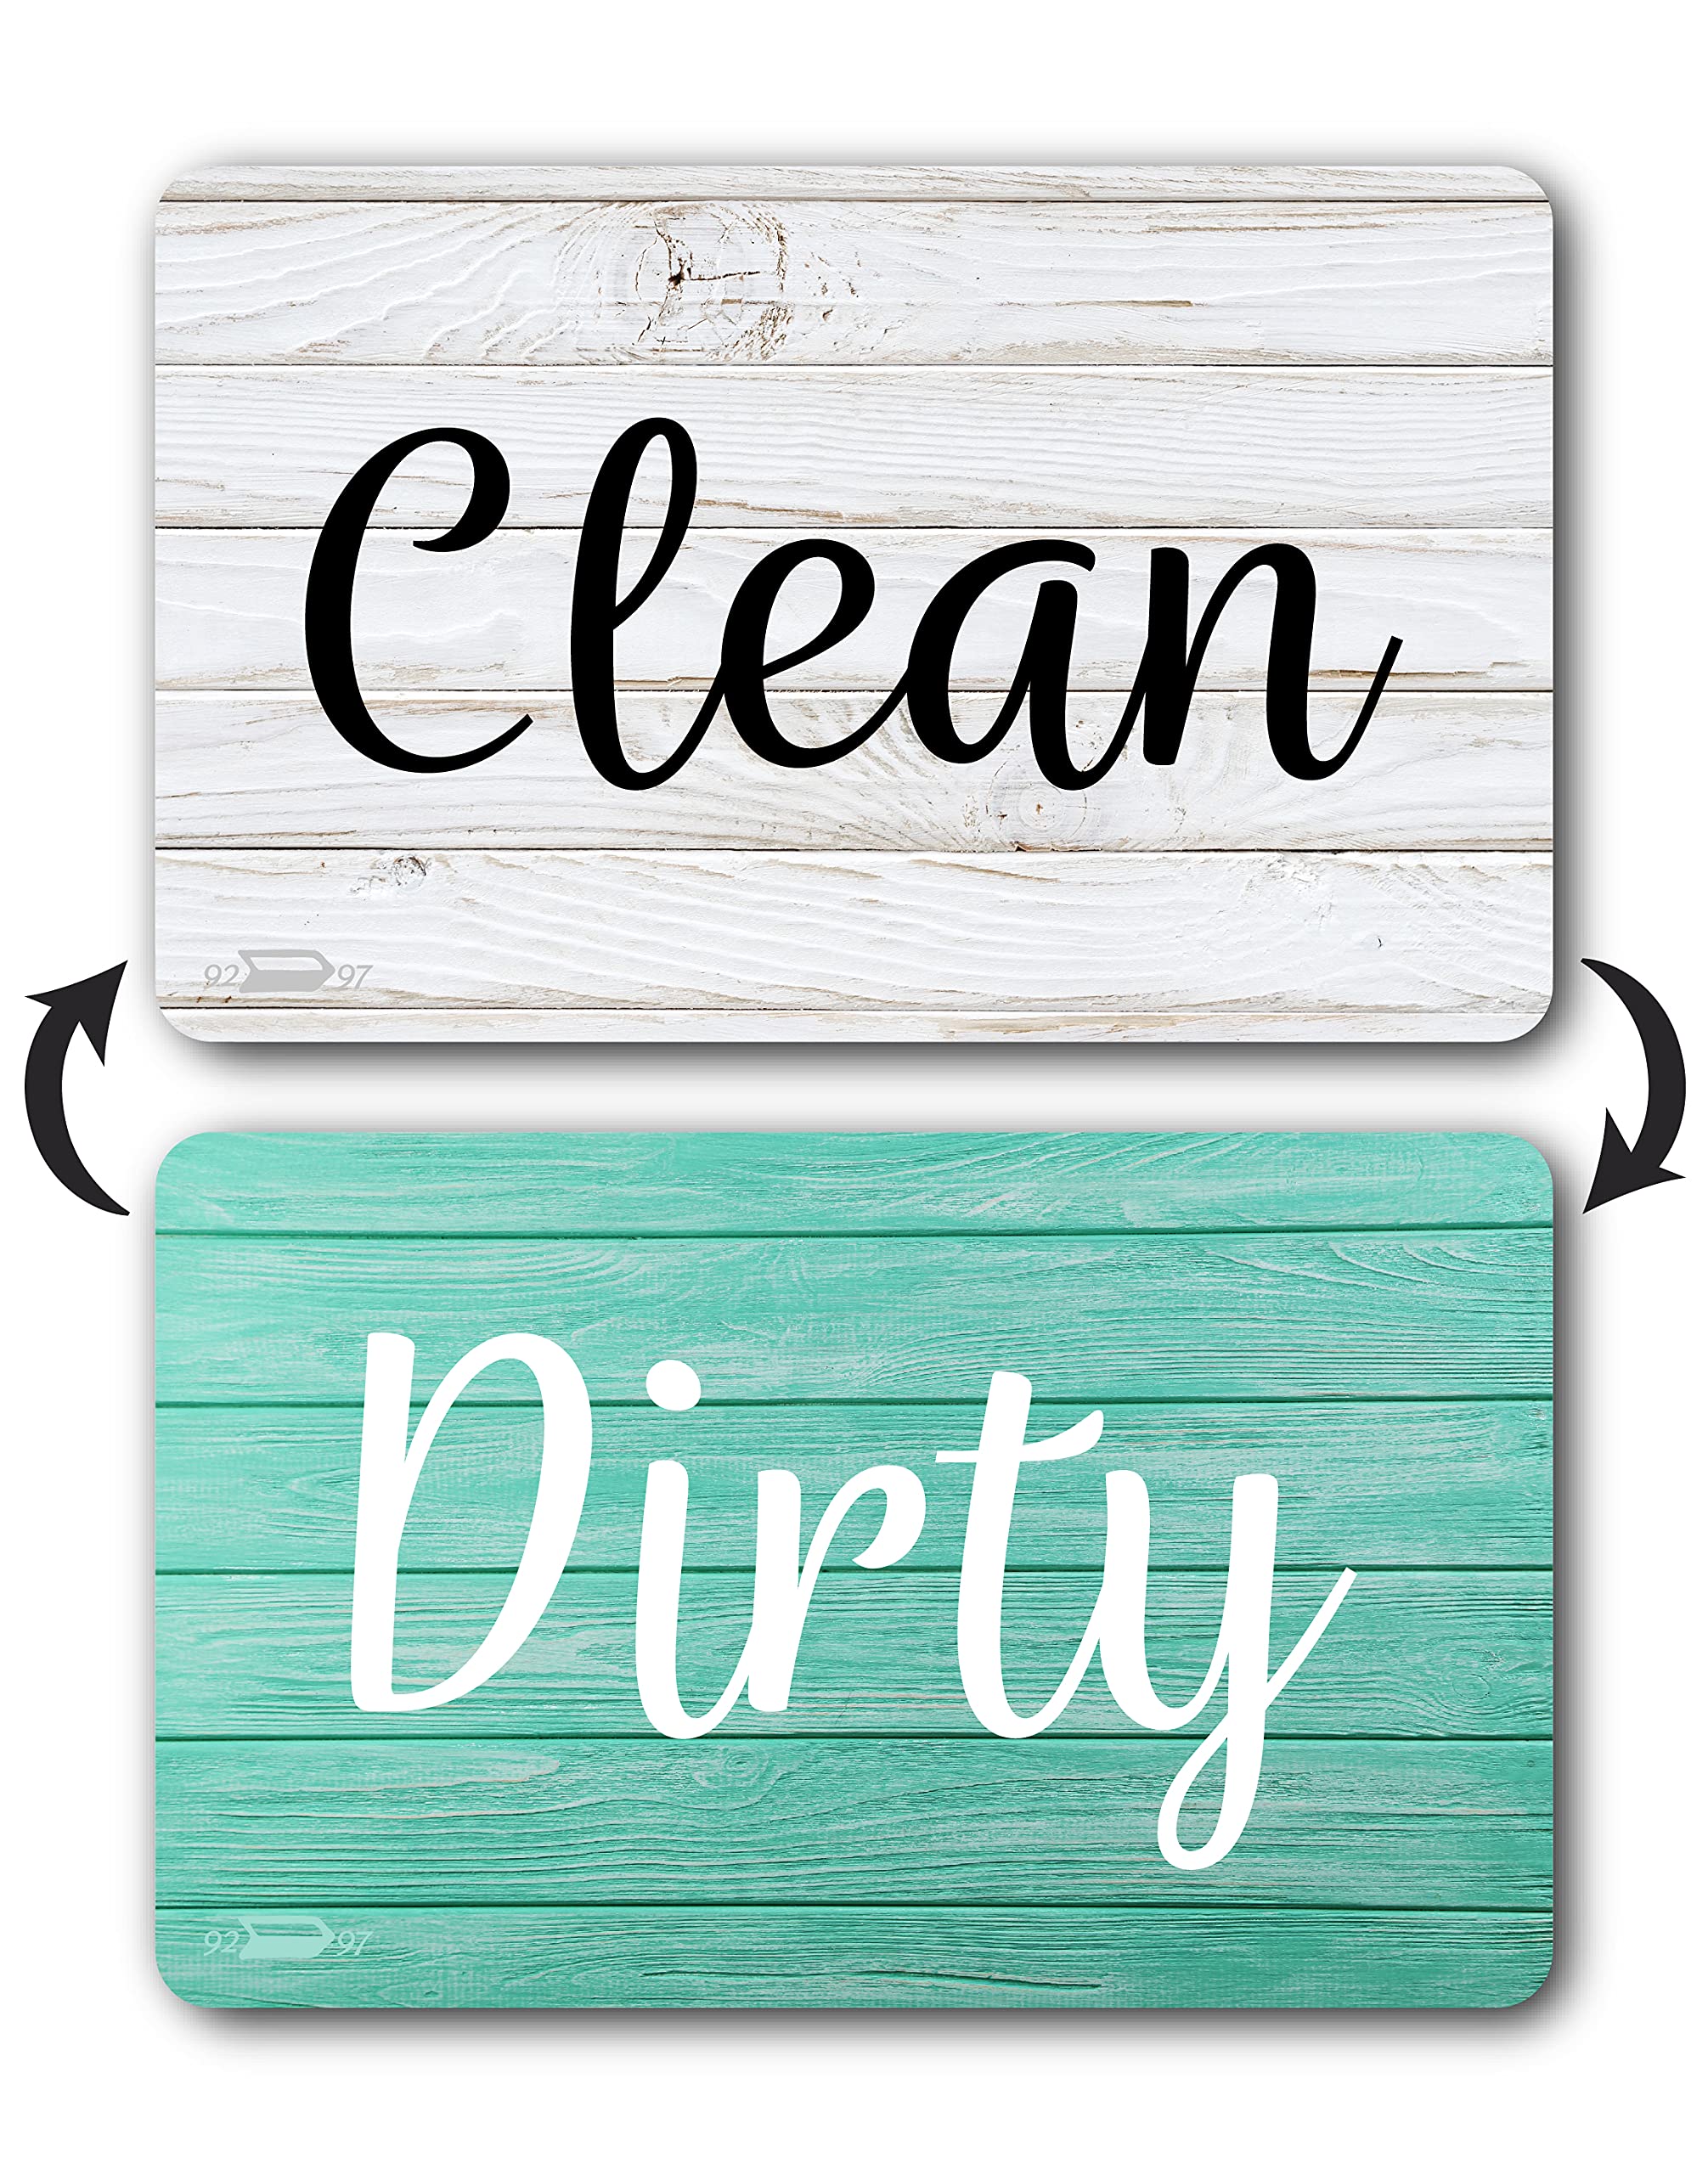 Brothers Bench Dishwasher Magnet Clean Dirty Sign, Teal Kitchen Accessories and Decor, Rustic Dishwasher Magnet, Clean Dirty Magnet for Dishwas